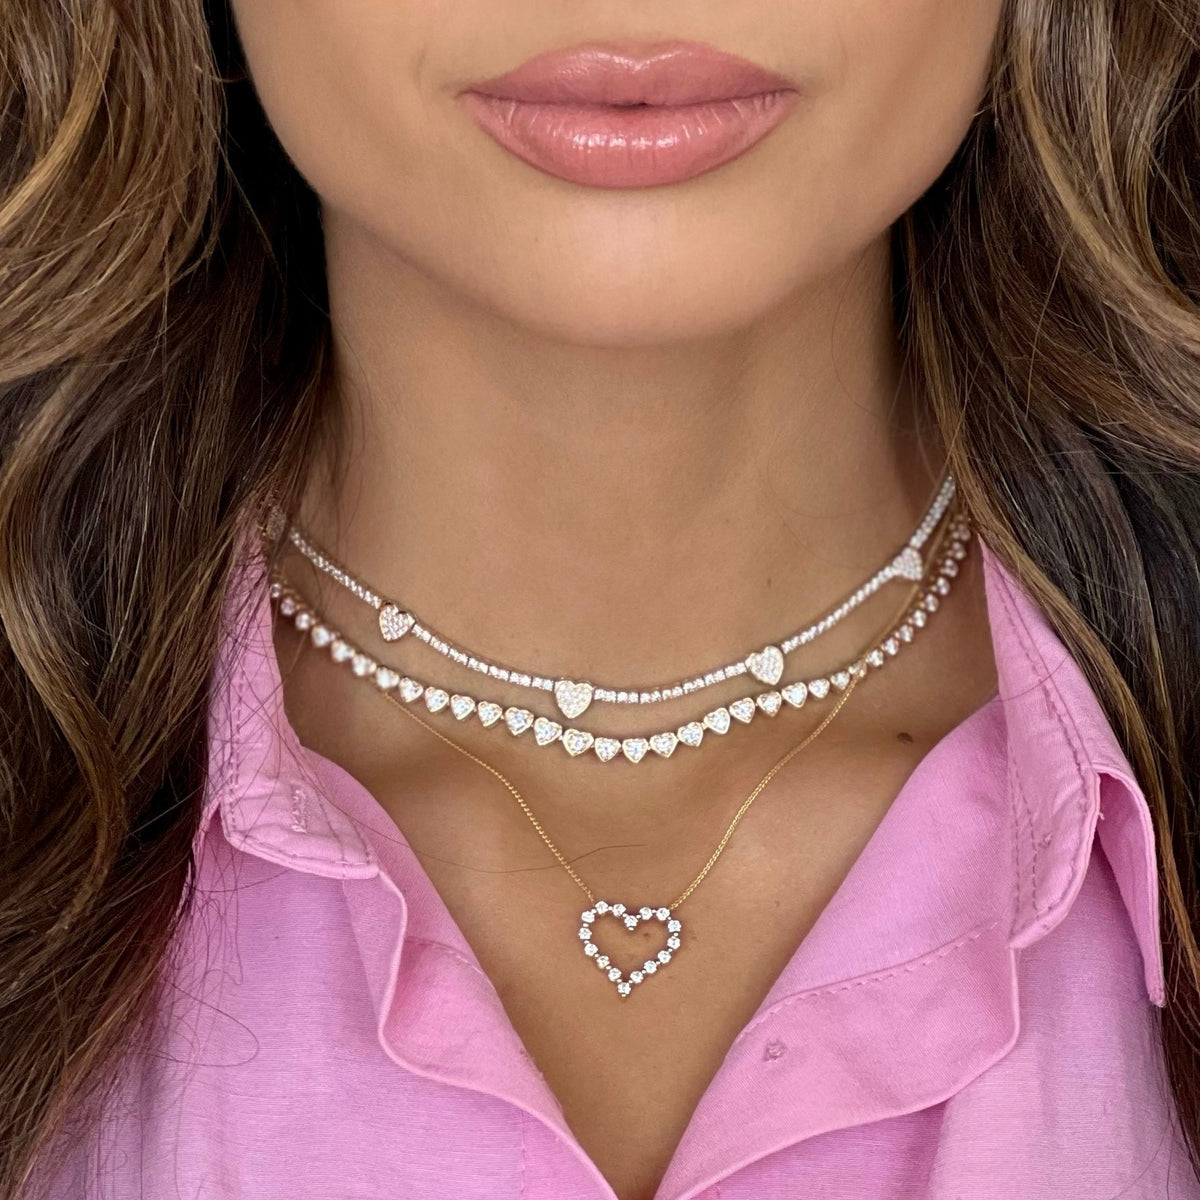 "Five of Hearts" Pave Diamond Tennis Necklace 2.42 ctw